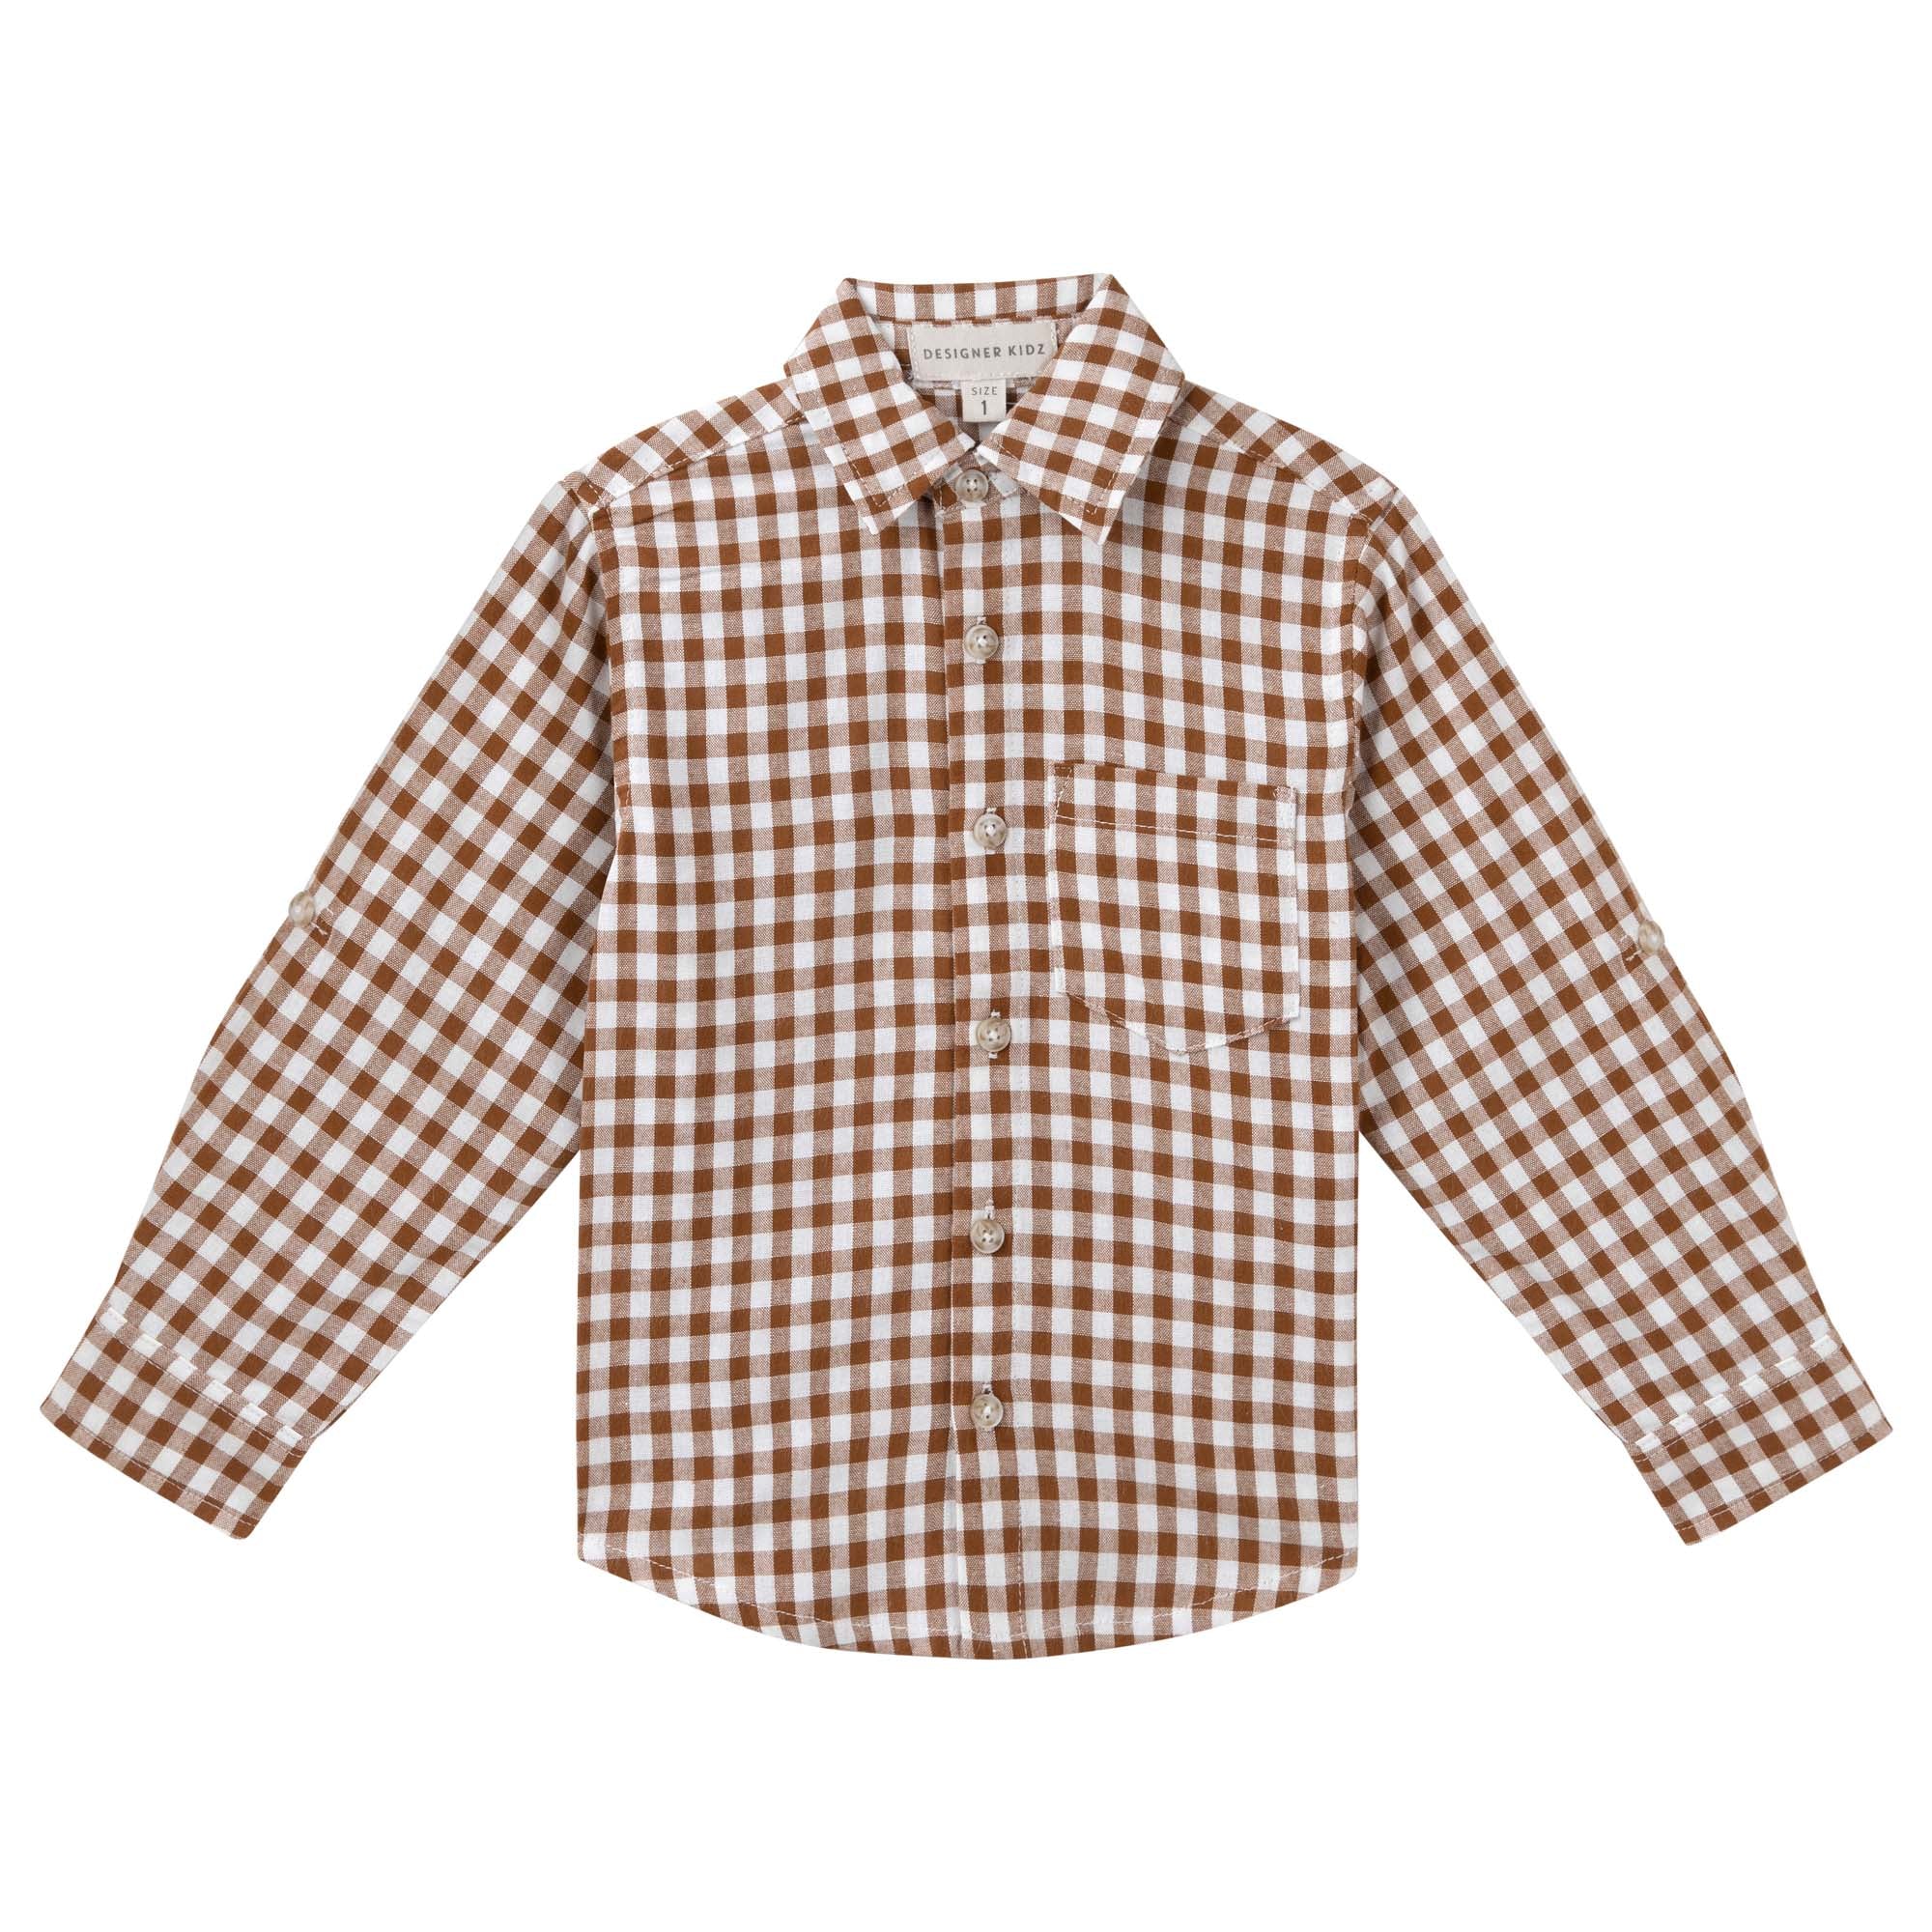 Oliver L/S Button Shirt - Cocoa Gingham